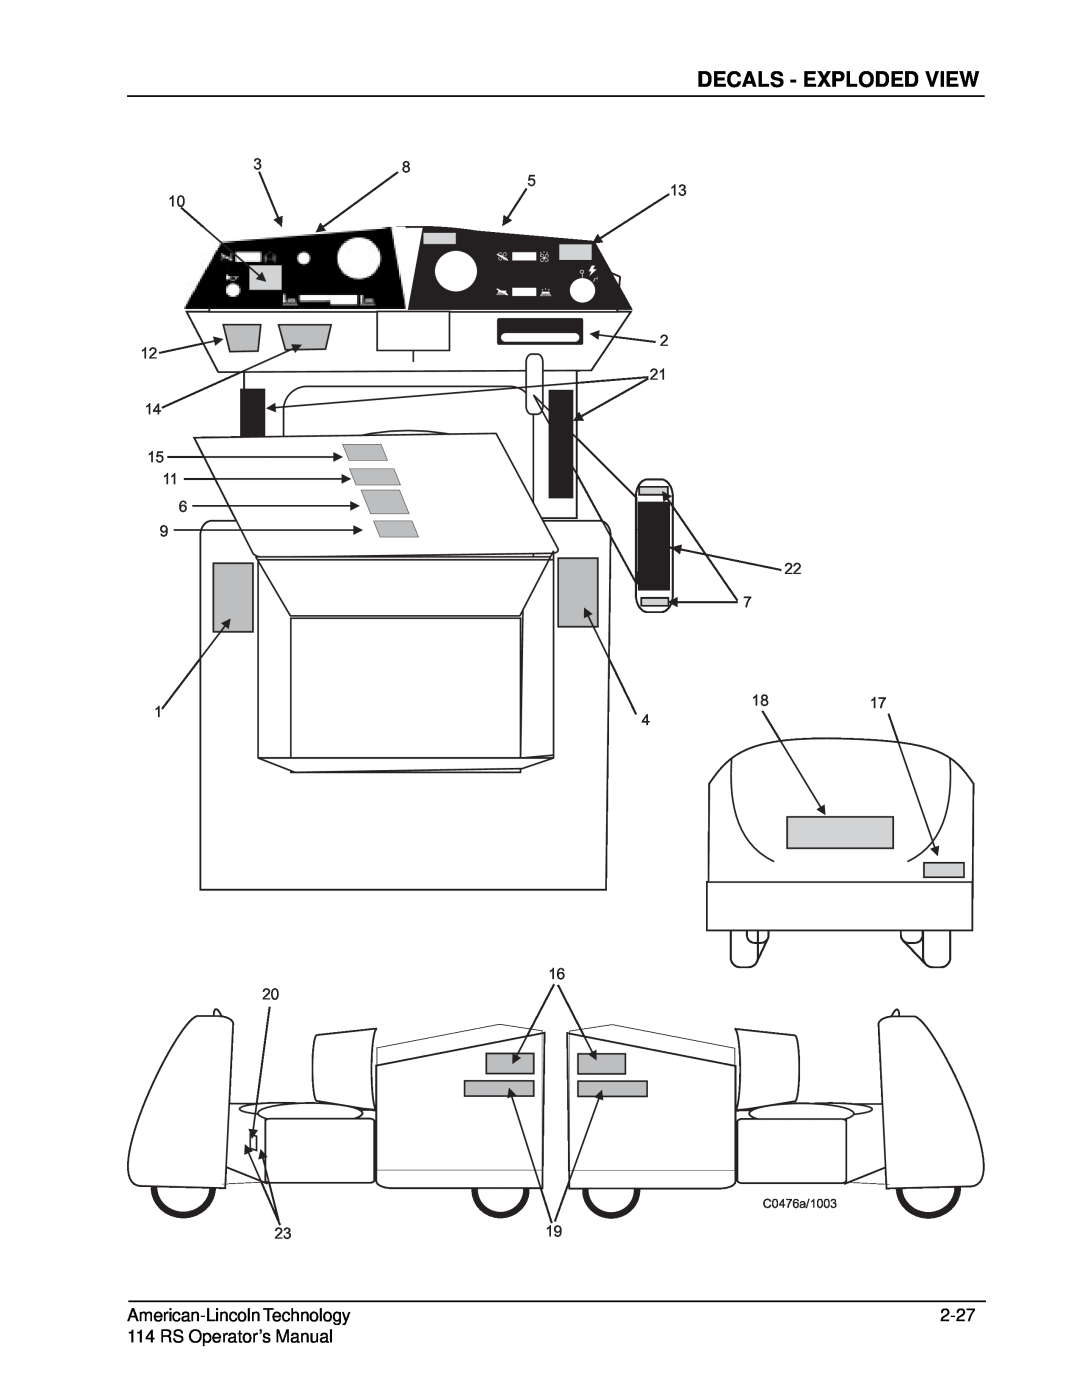 Nilfisk-ALTO 114RS SWEEPER manual Decals - Exploded View, American-LincolnTechnology, 2-27, RS Operator’s Manual 